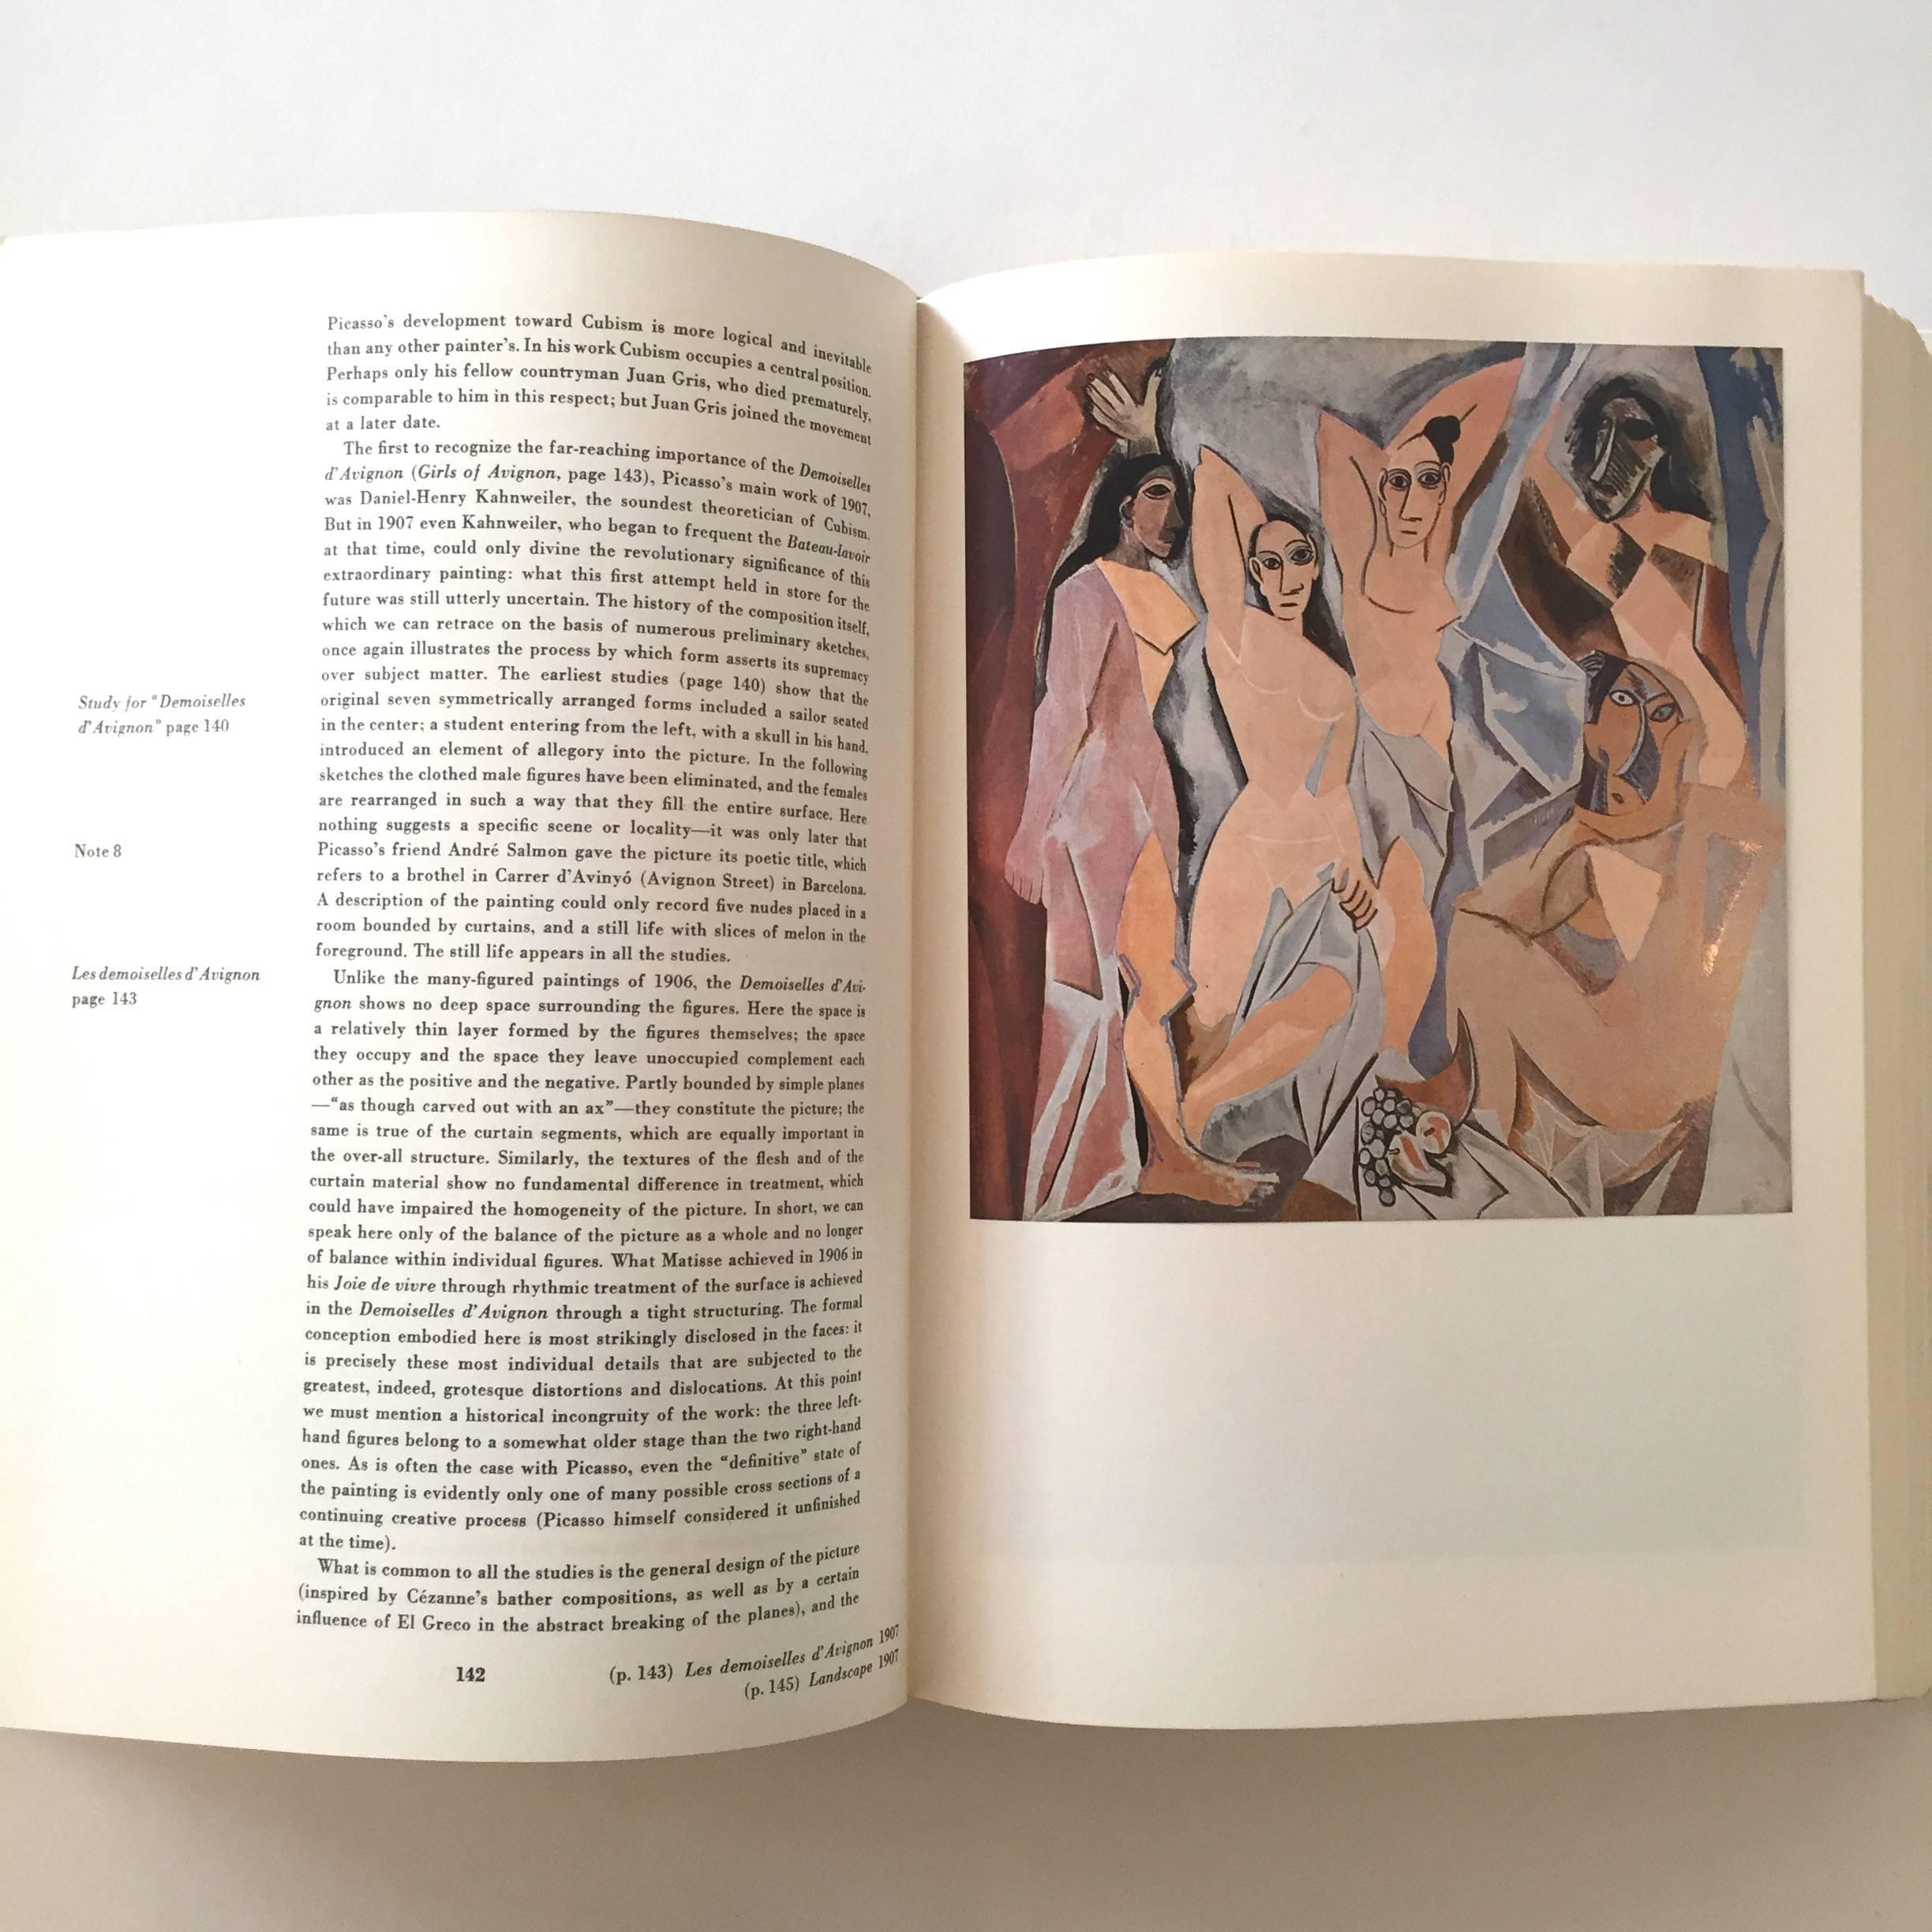 First edition, published by Harry N. Abrams, Inc., New York, 1955

with a beautiful cover design made especially for the book by Picasso, this comprehensive oversized monograph covers Picasso’s career up until 1955. With 606 reproductions, the book